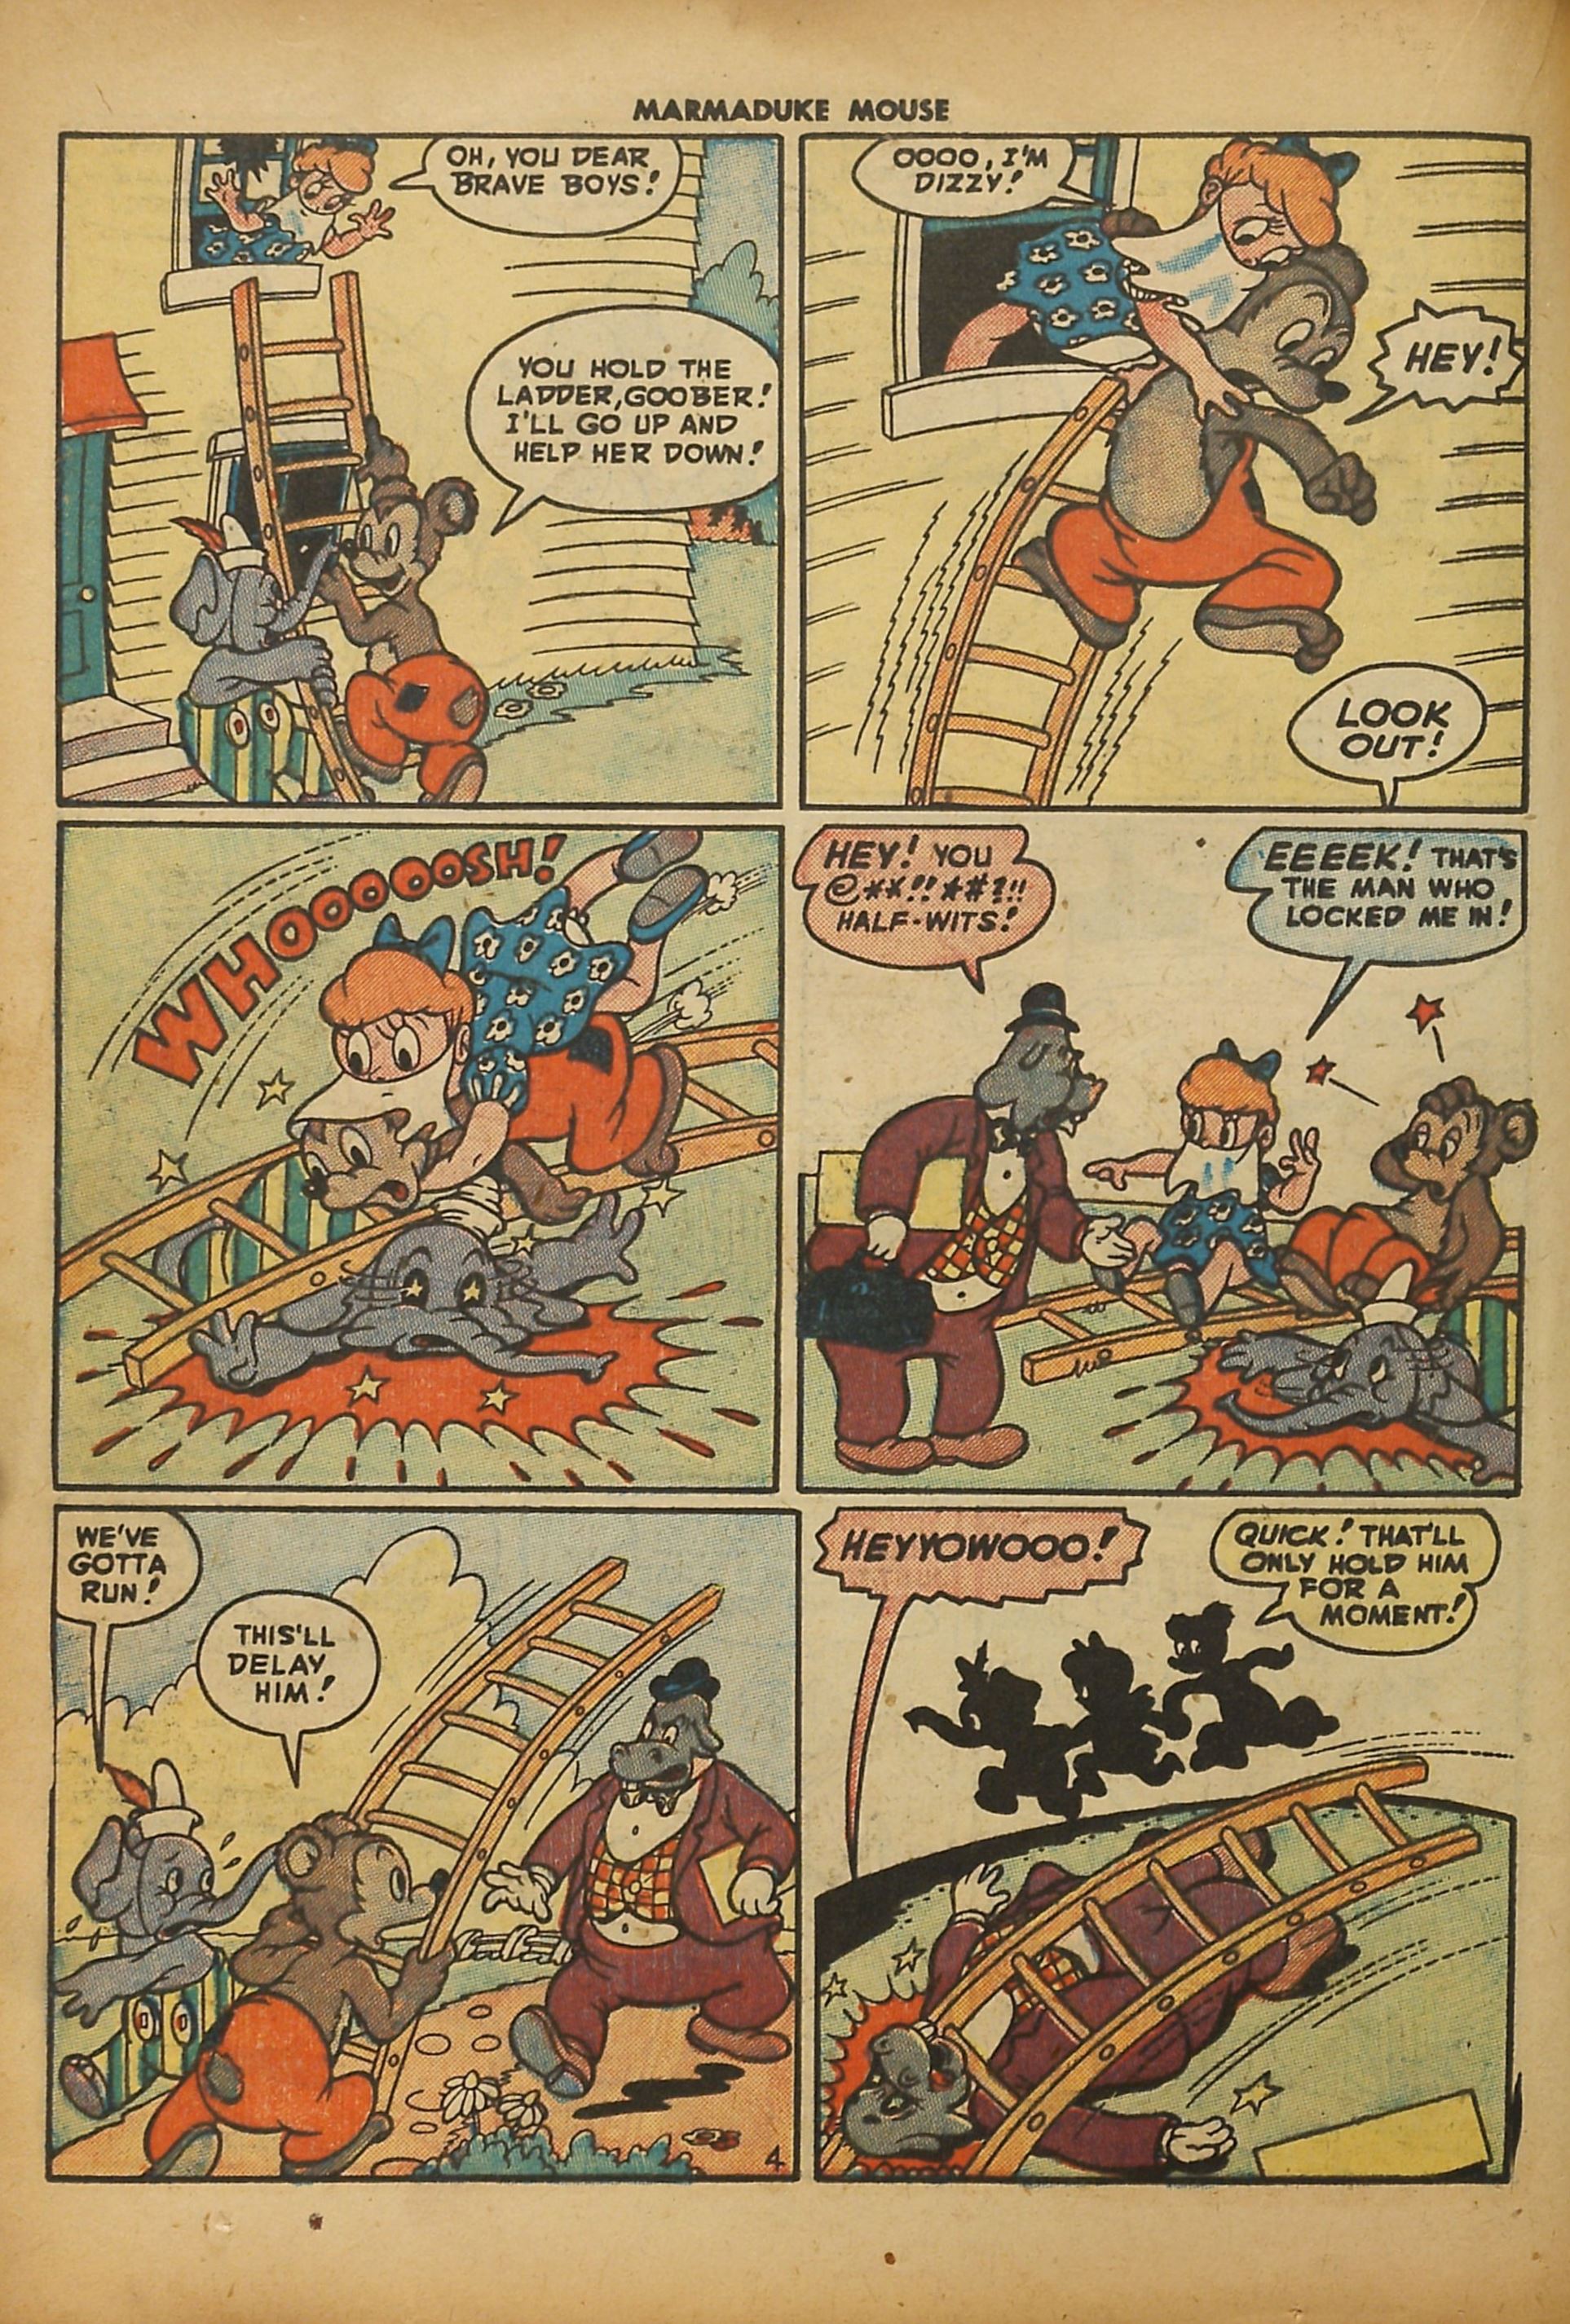 Read online Marmaduke Mouse comic -  Issue #11 - 25